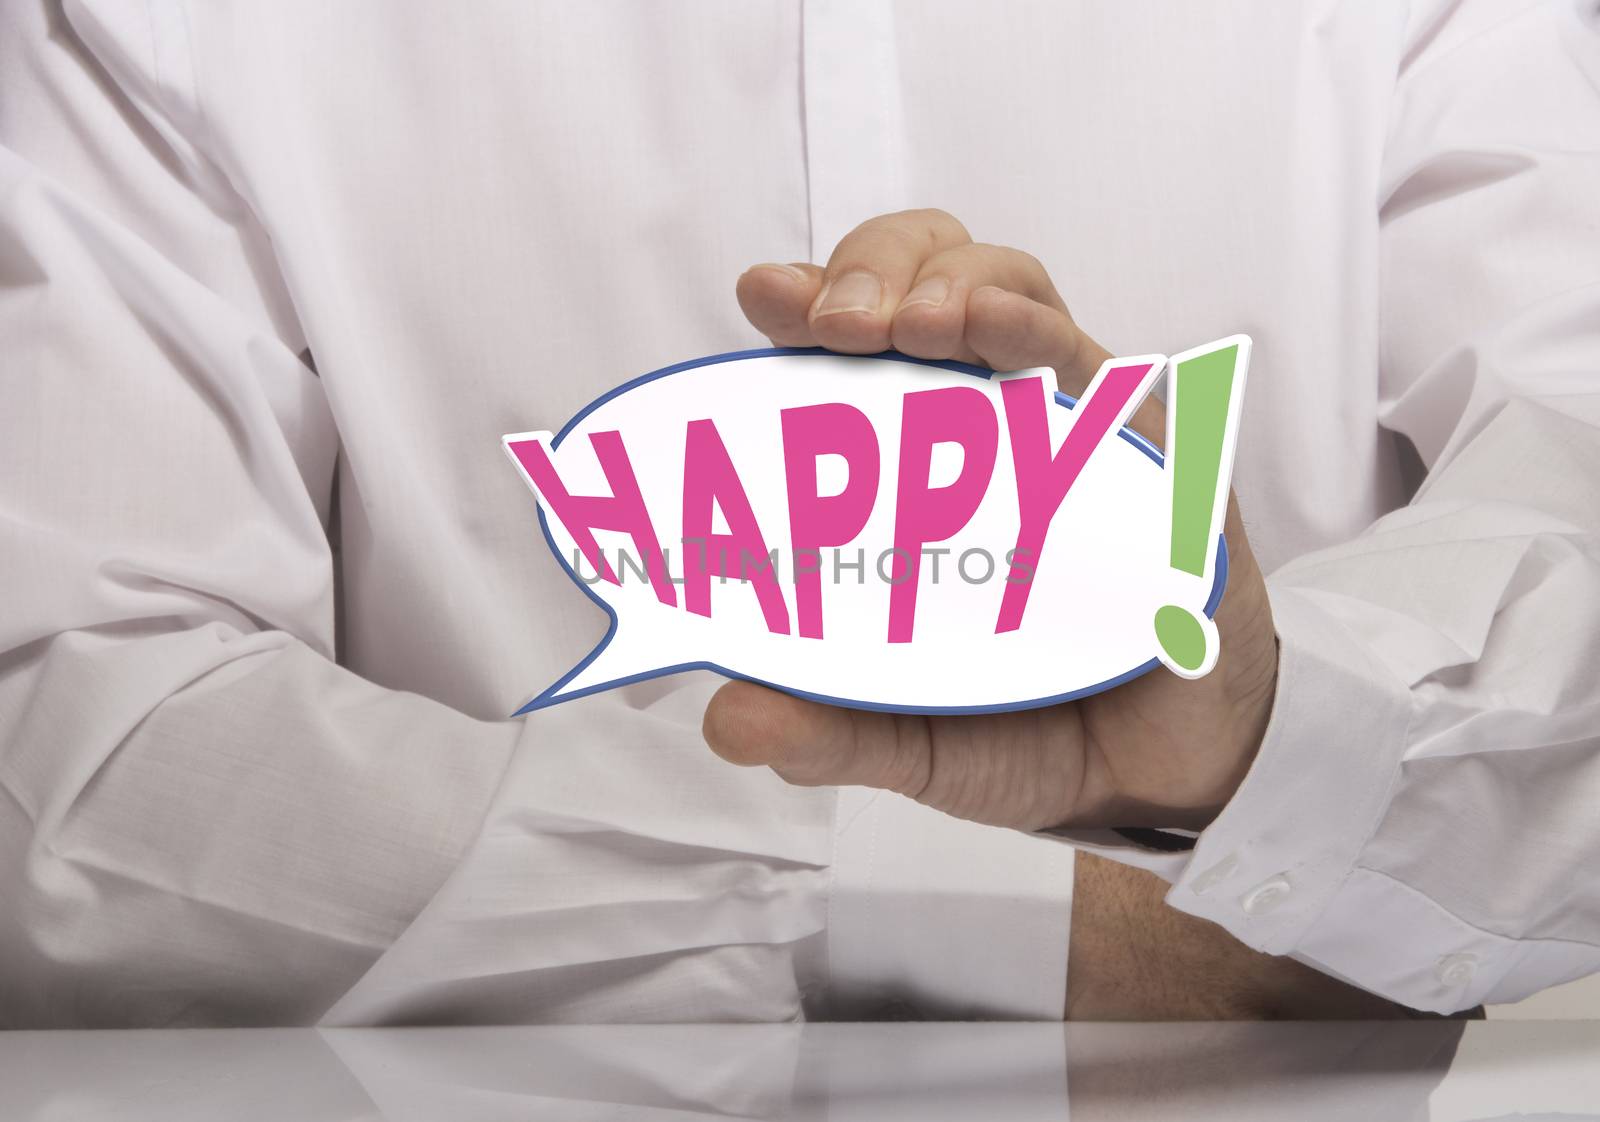 Image of a man hand holding speech balloon with the text happy, white shirt. Concept of happiness or happy customer.